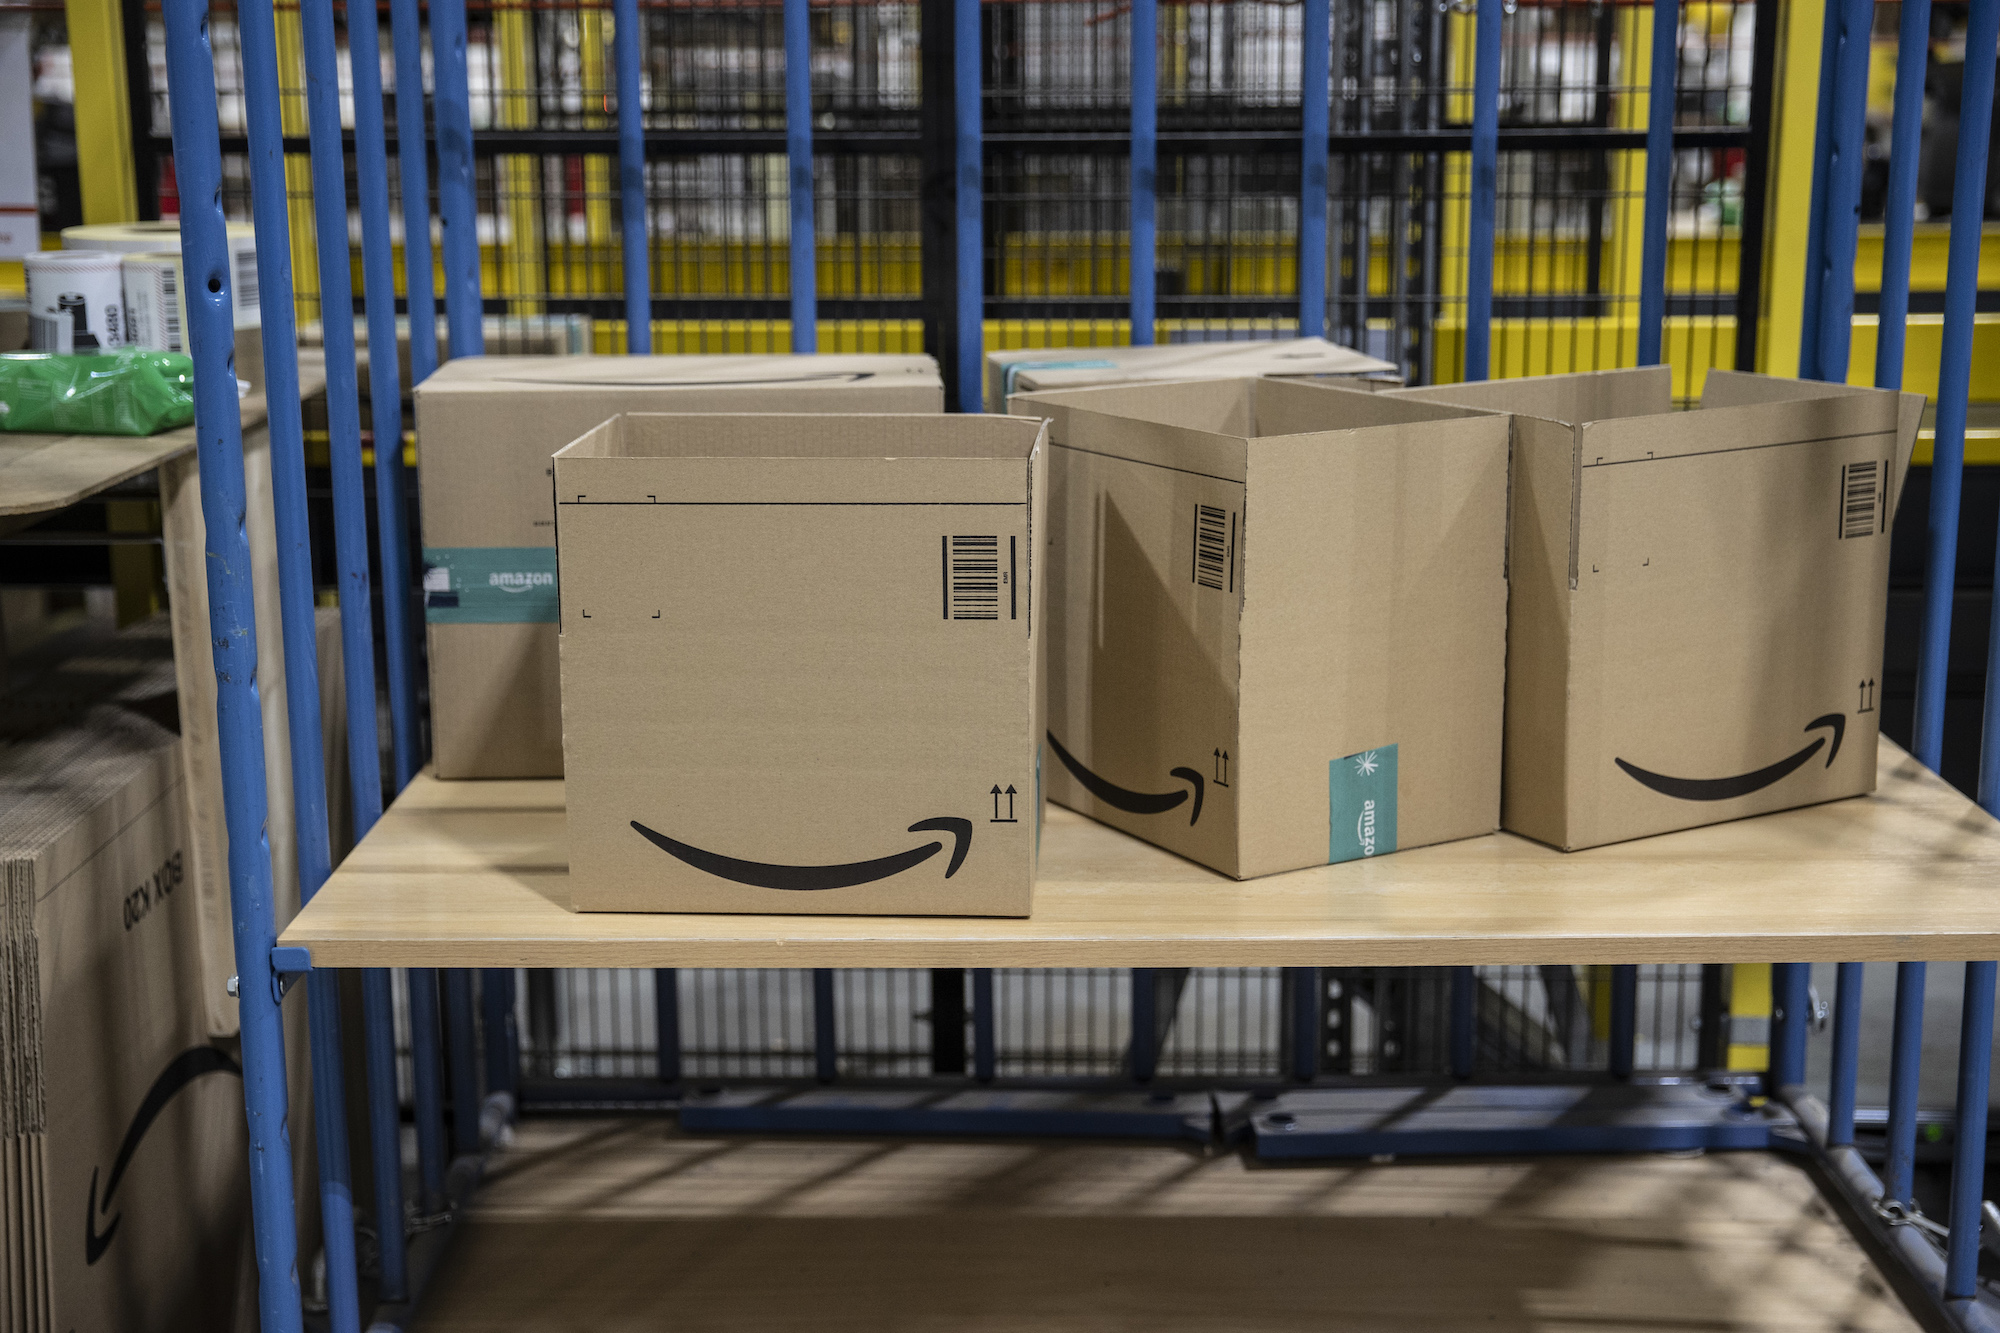 LEAKED AUDIO: Amazon Union Buster Warns Workers ‘Things Could Become Worse’ thumbnail